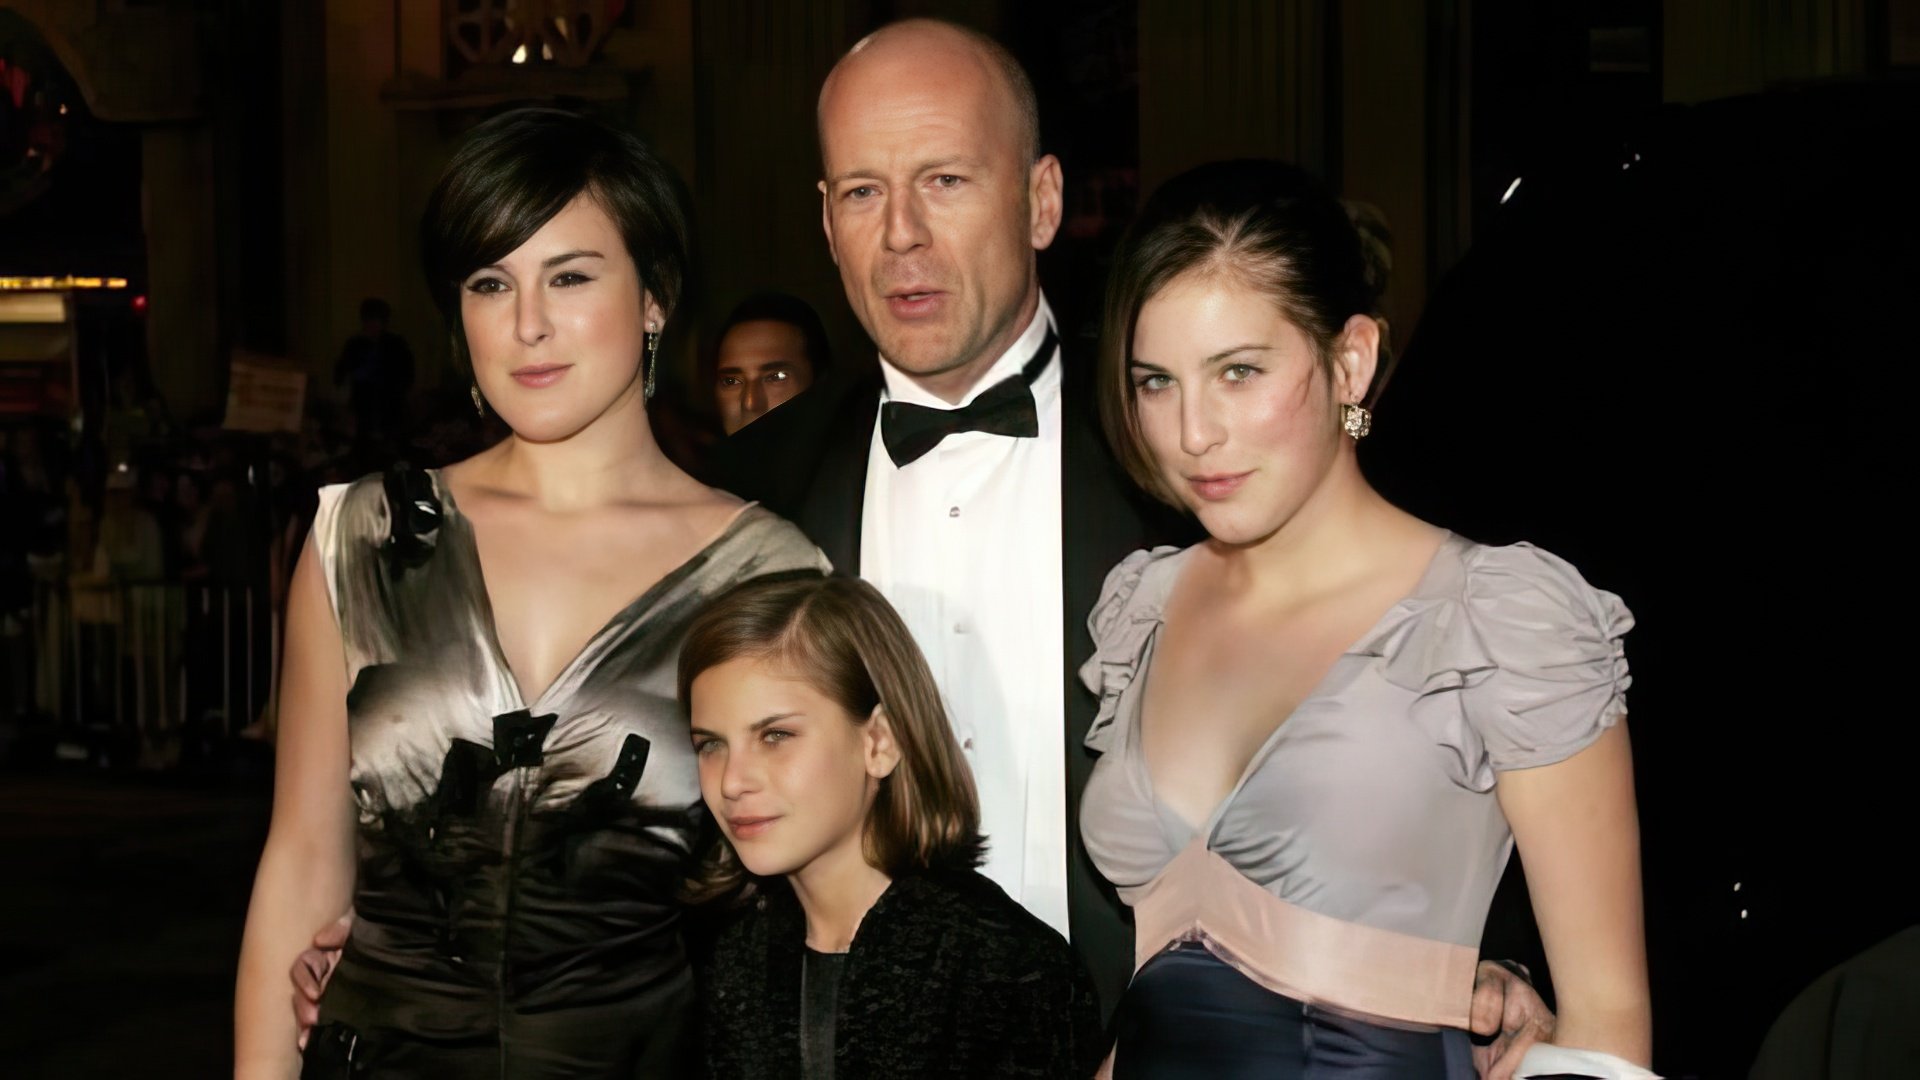 Bruce Willis’ and Demi Moore’s children became adult